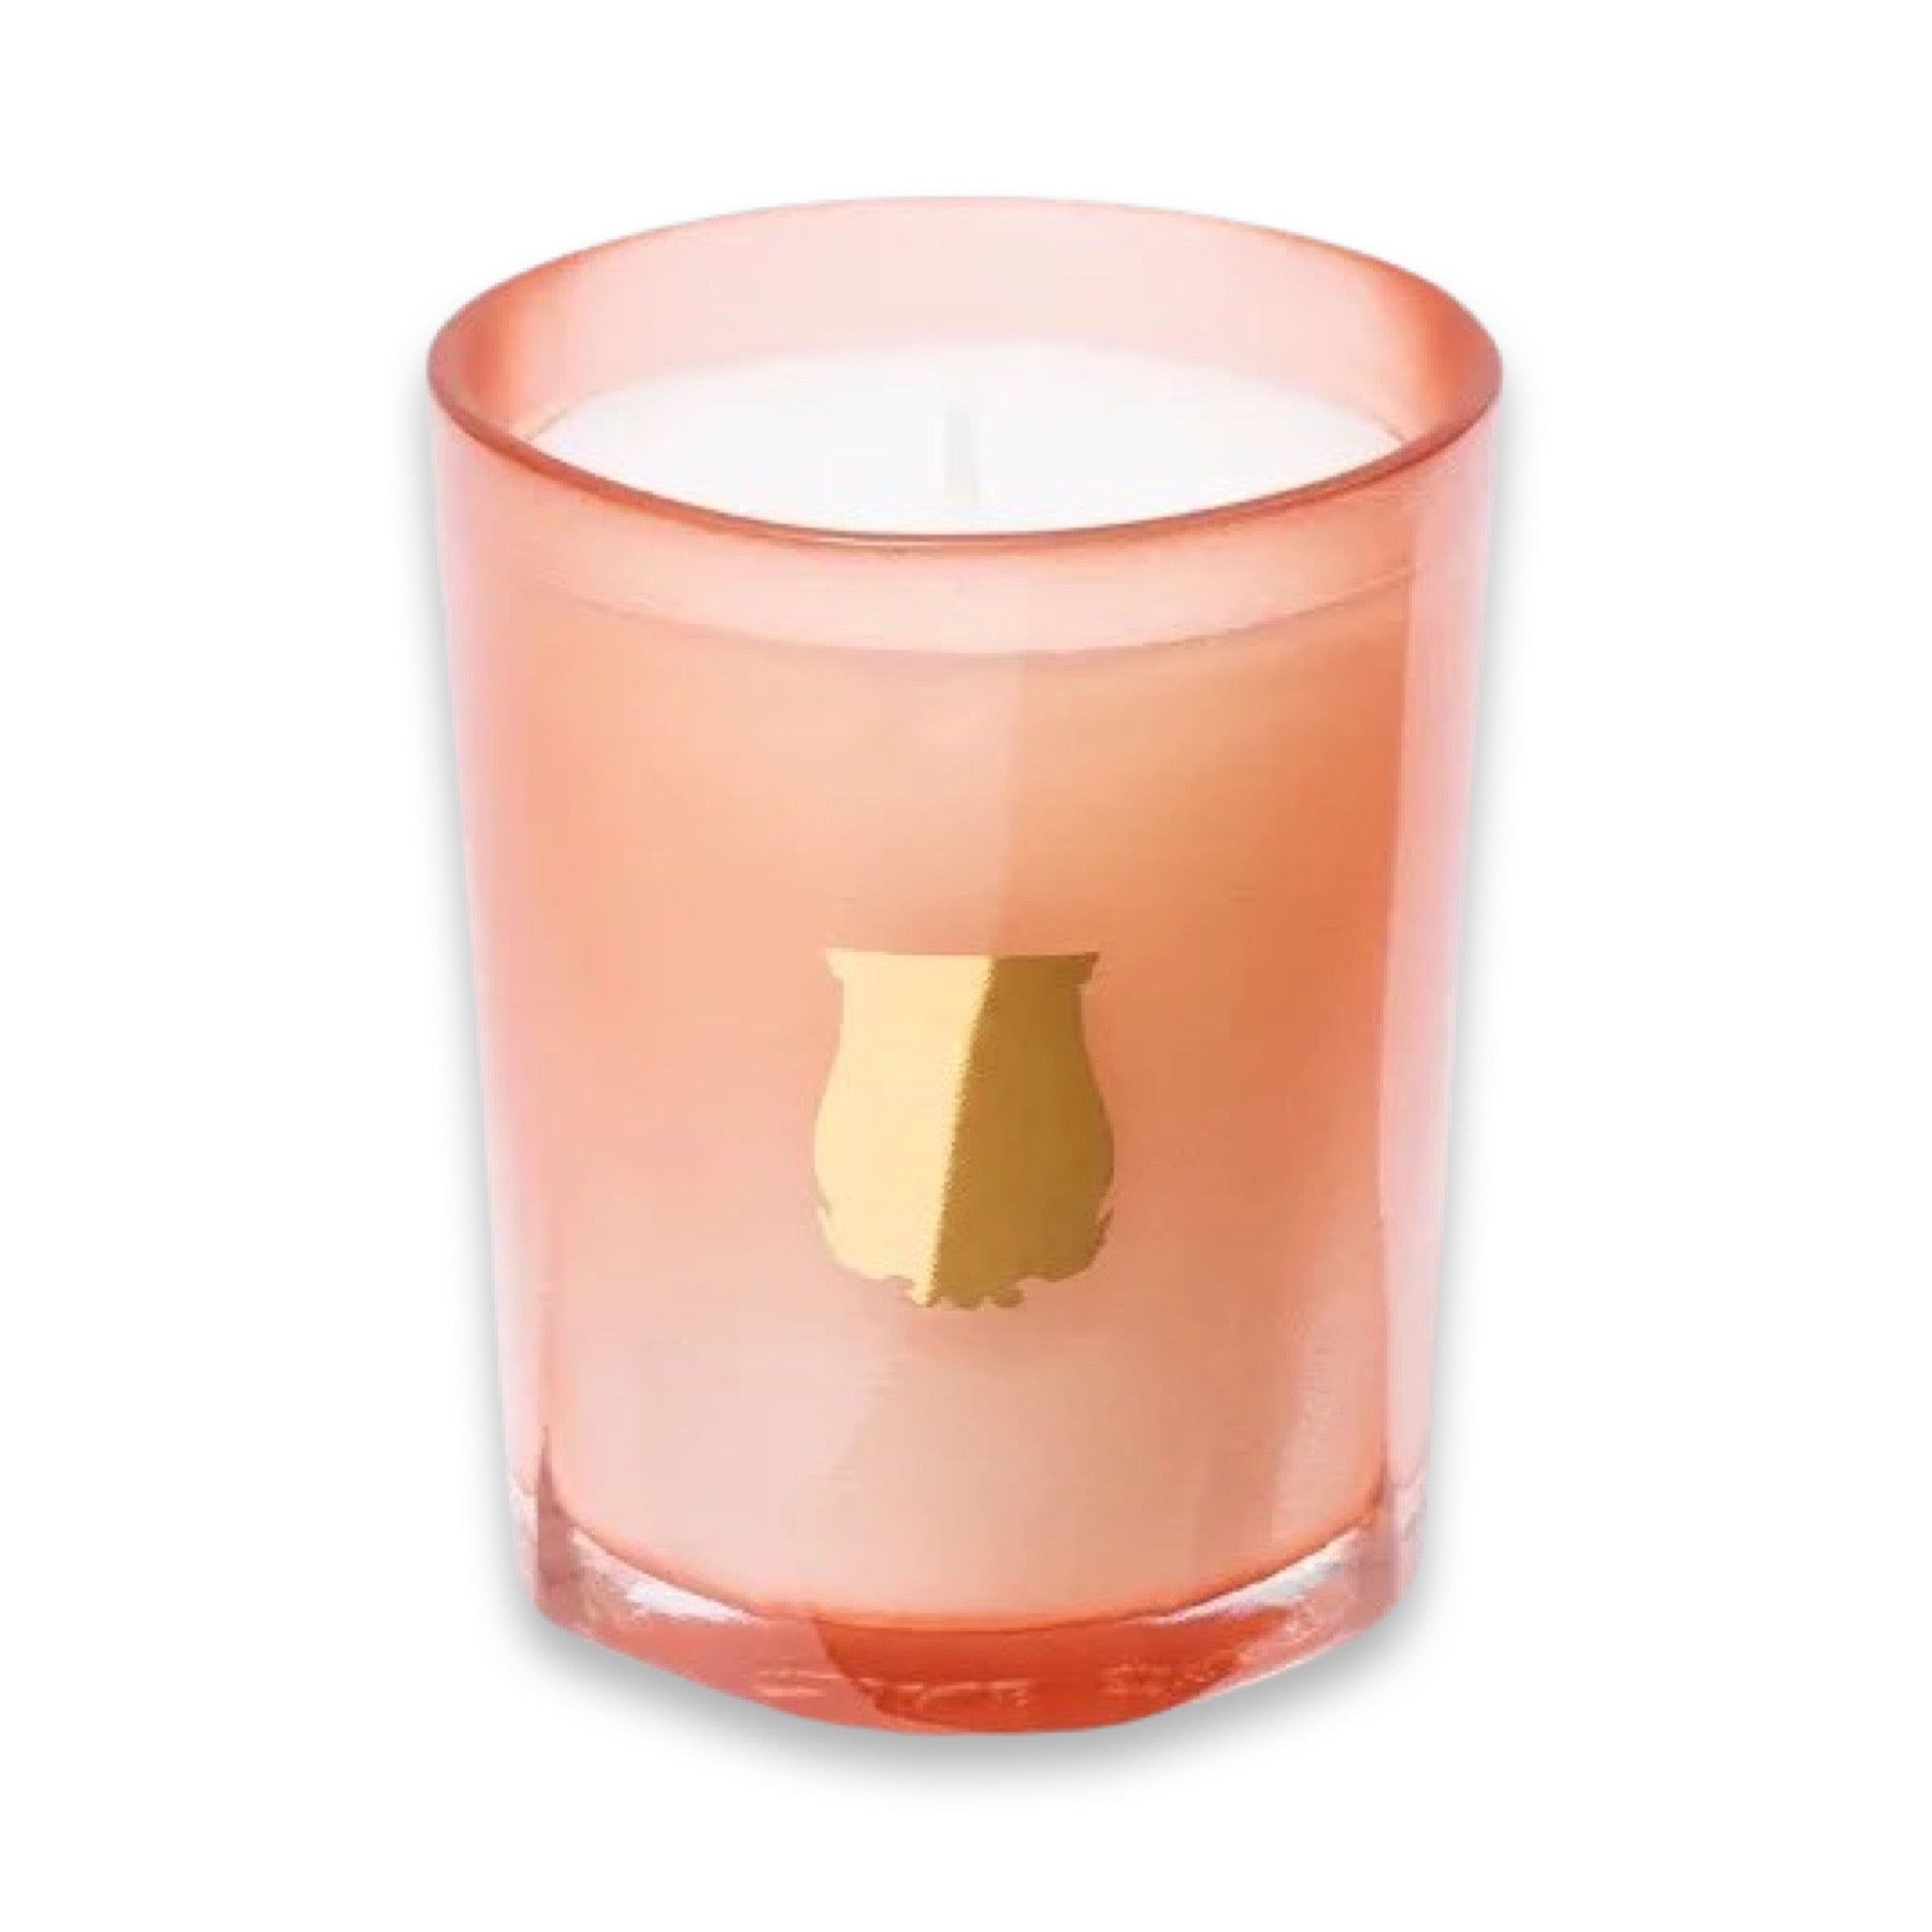 Trudon Tuileries Petit Candle 70g